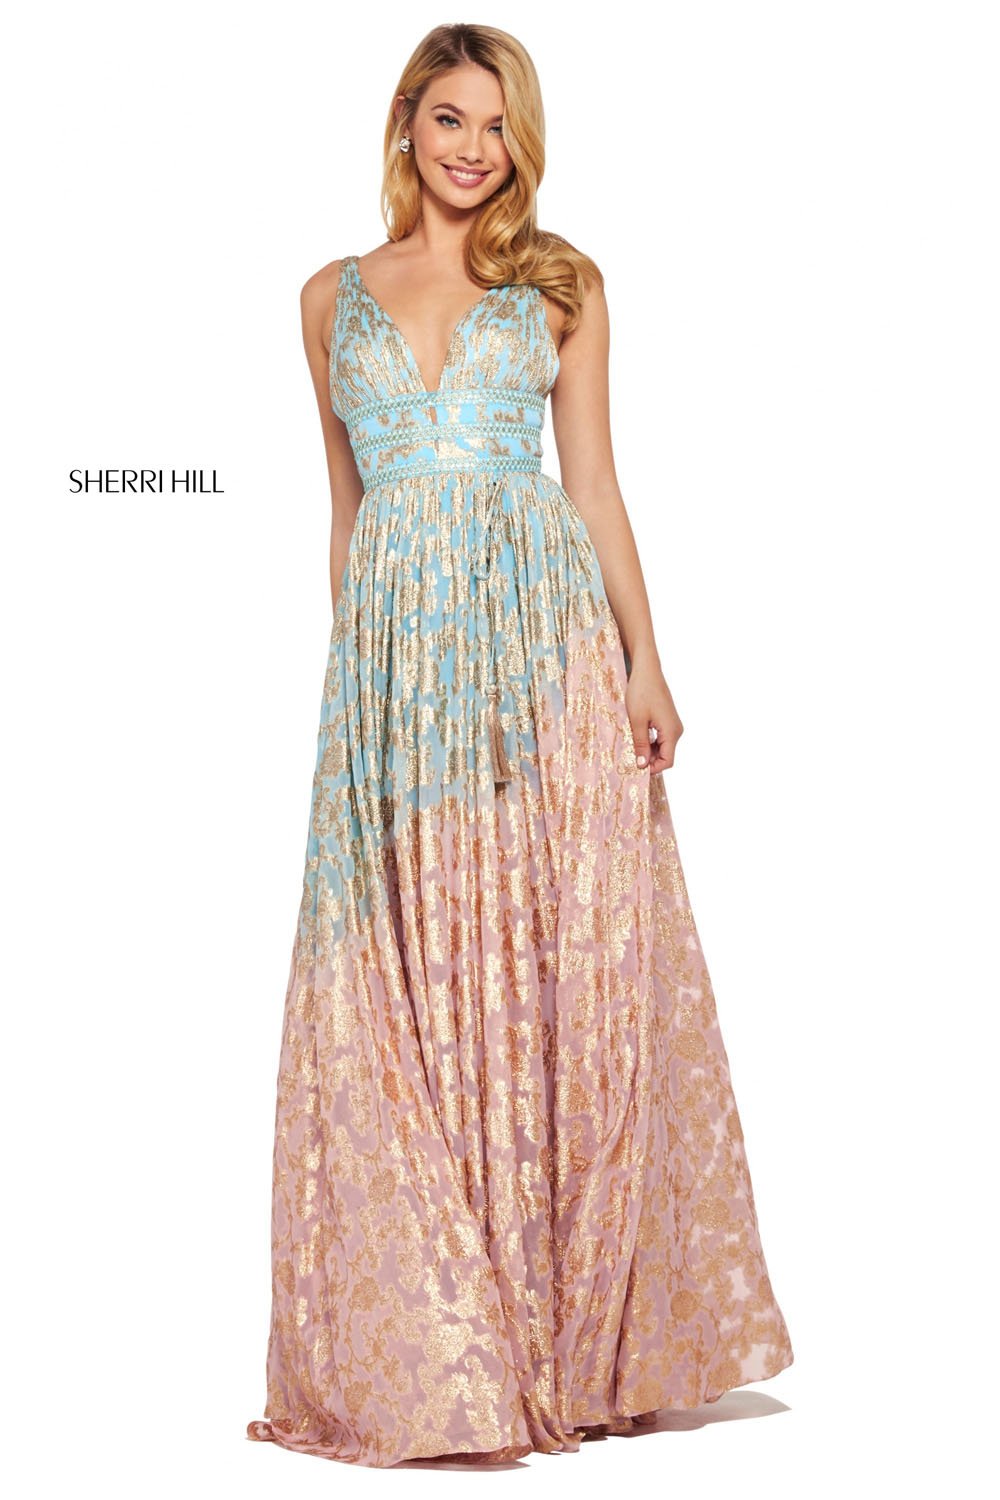 Sherri Hill 53375 dress images in these colors: Light Blue Pink, Nude Aqua, Lilac Gold, Periwinkle Coral.